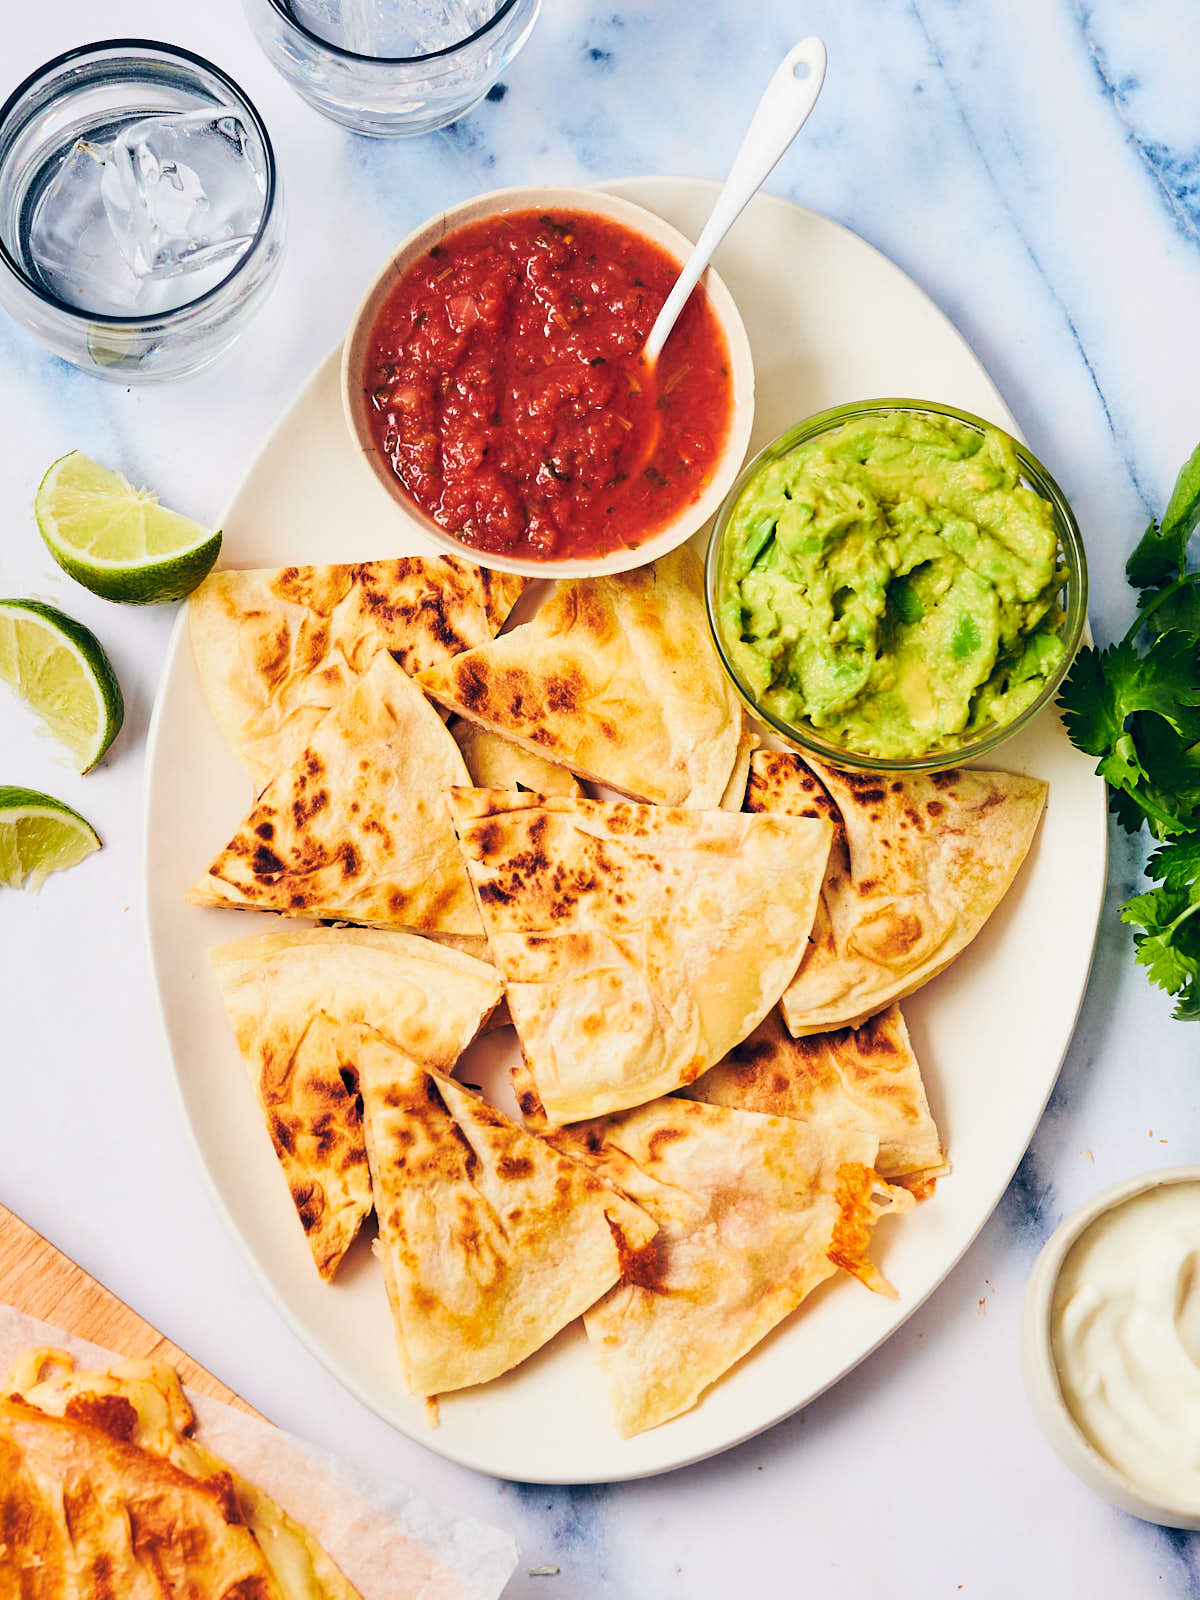 Cheese quesadillas on a plate with guacamole and salsa.